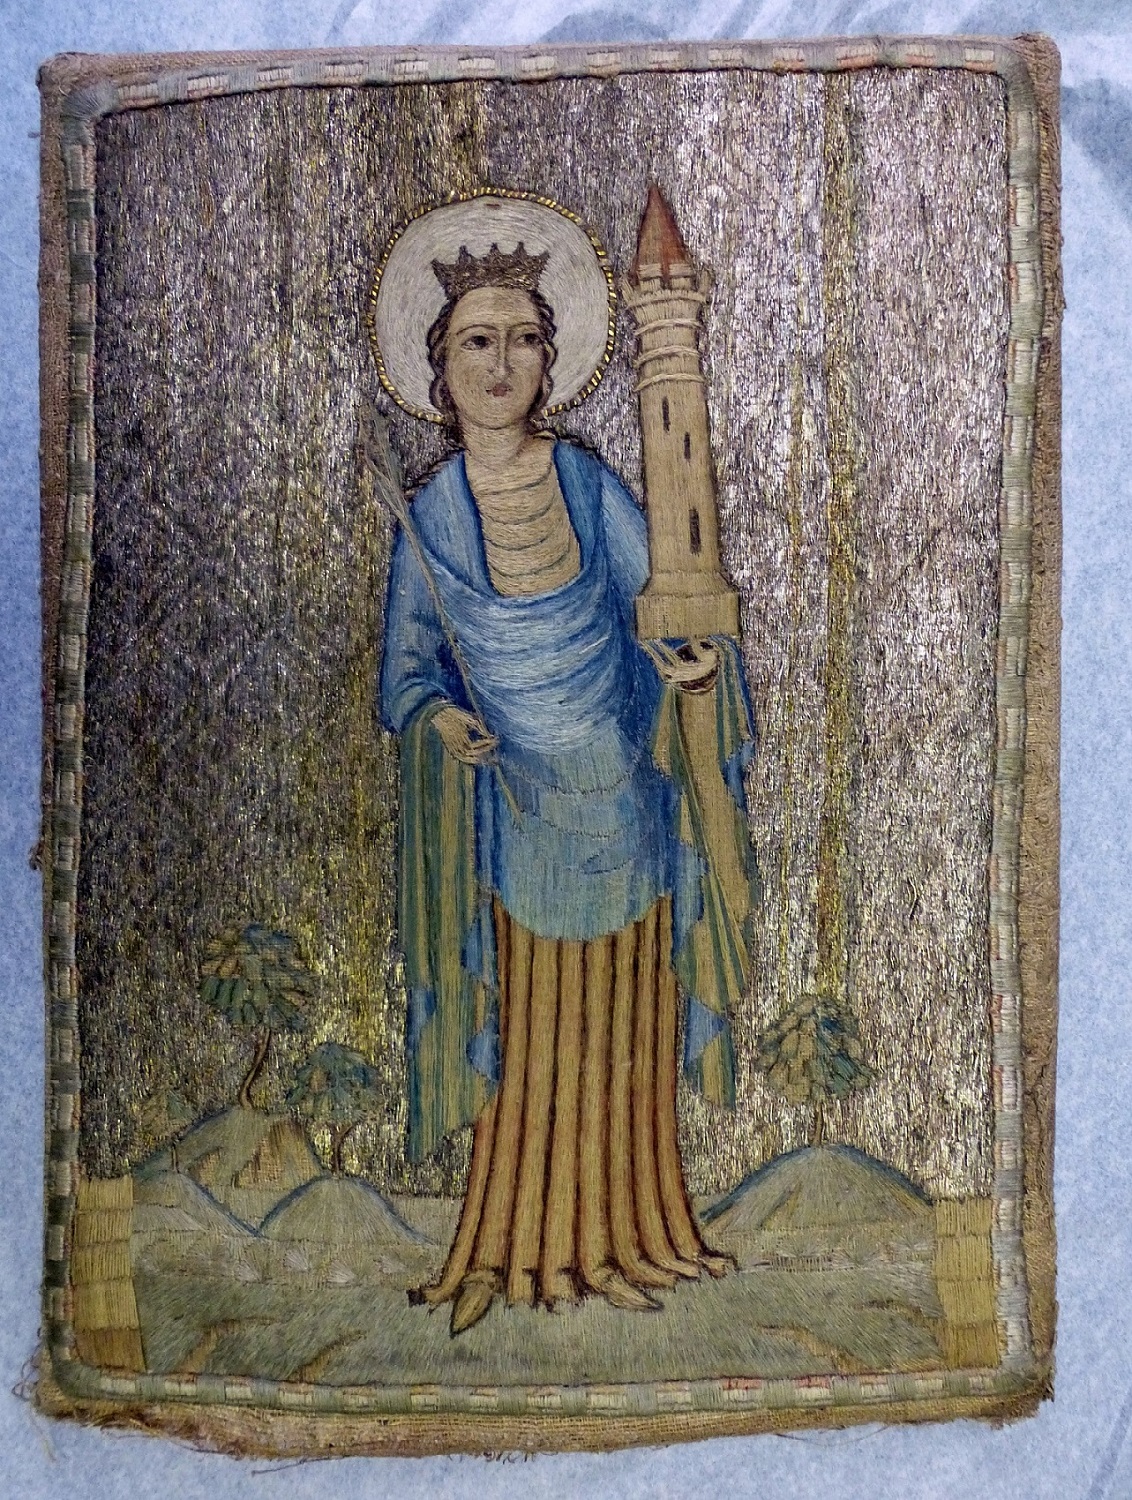 T.13-1937, embroidered picture of St. Barbara, probably a 20th century forgery © Victoria and Albert Museum, London